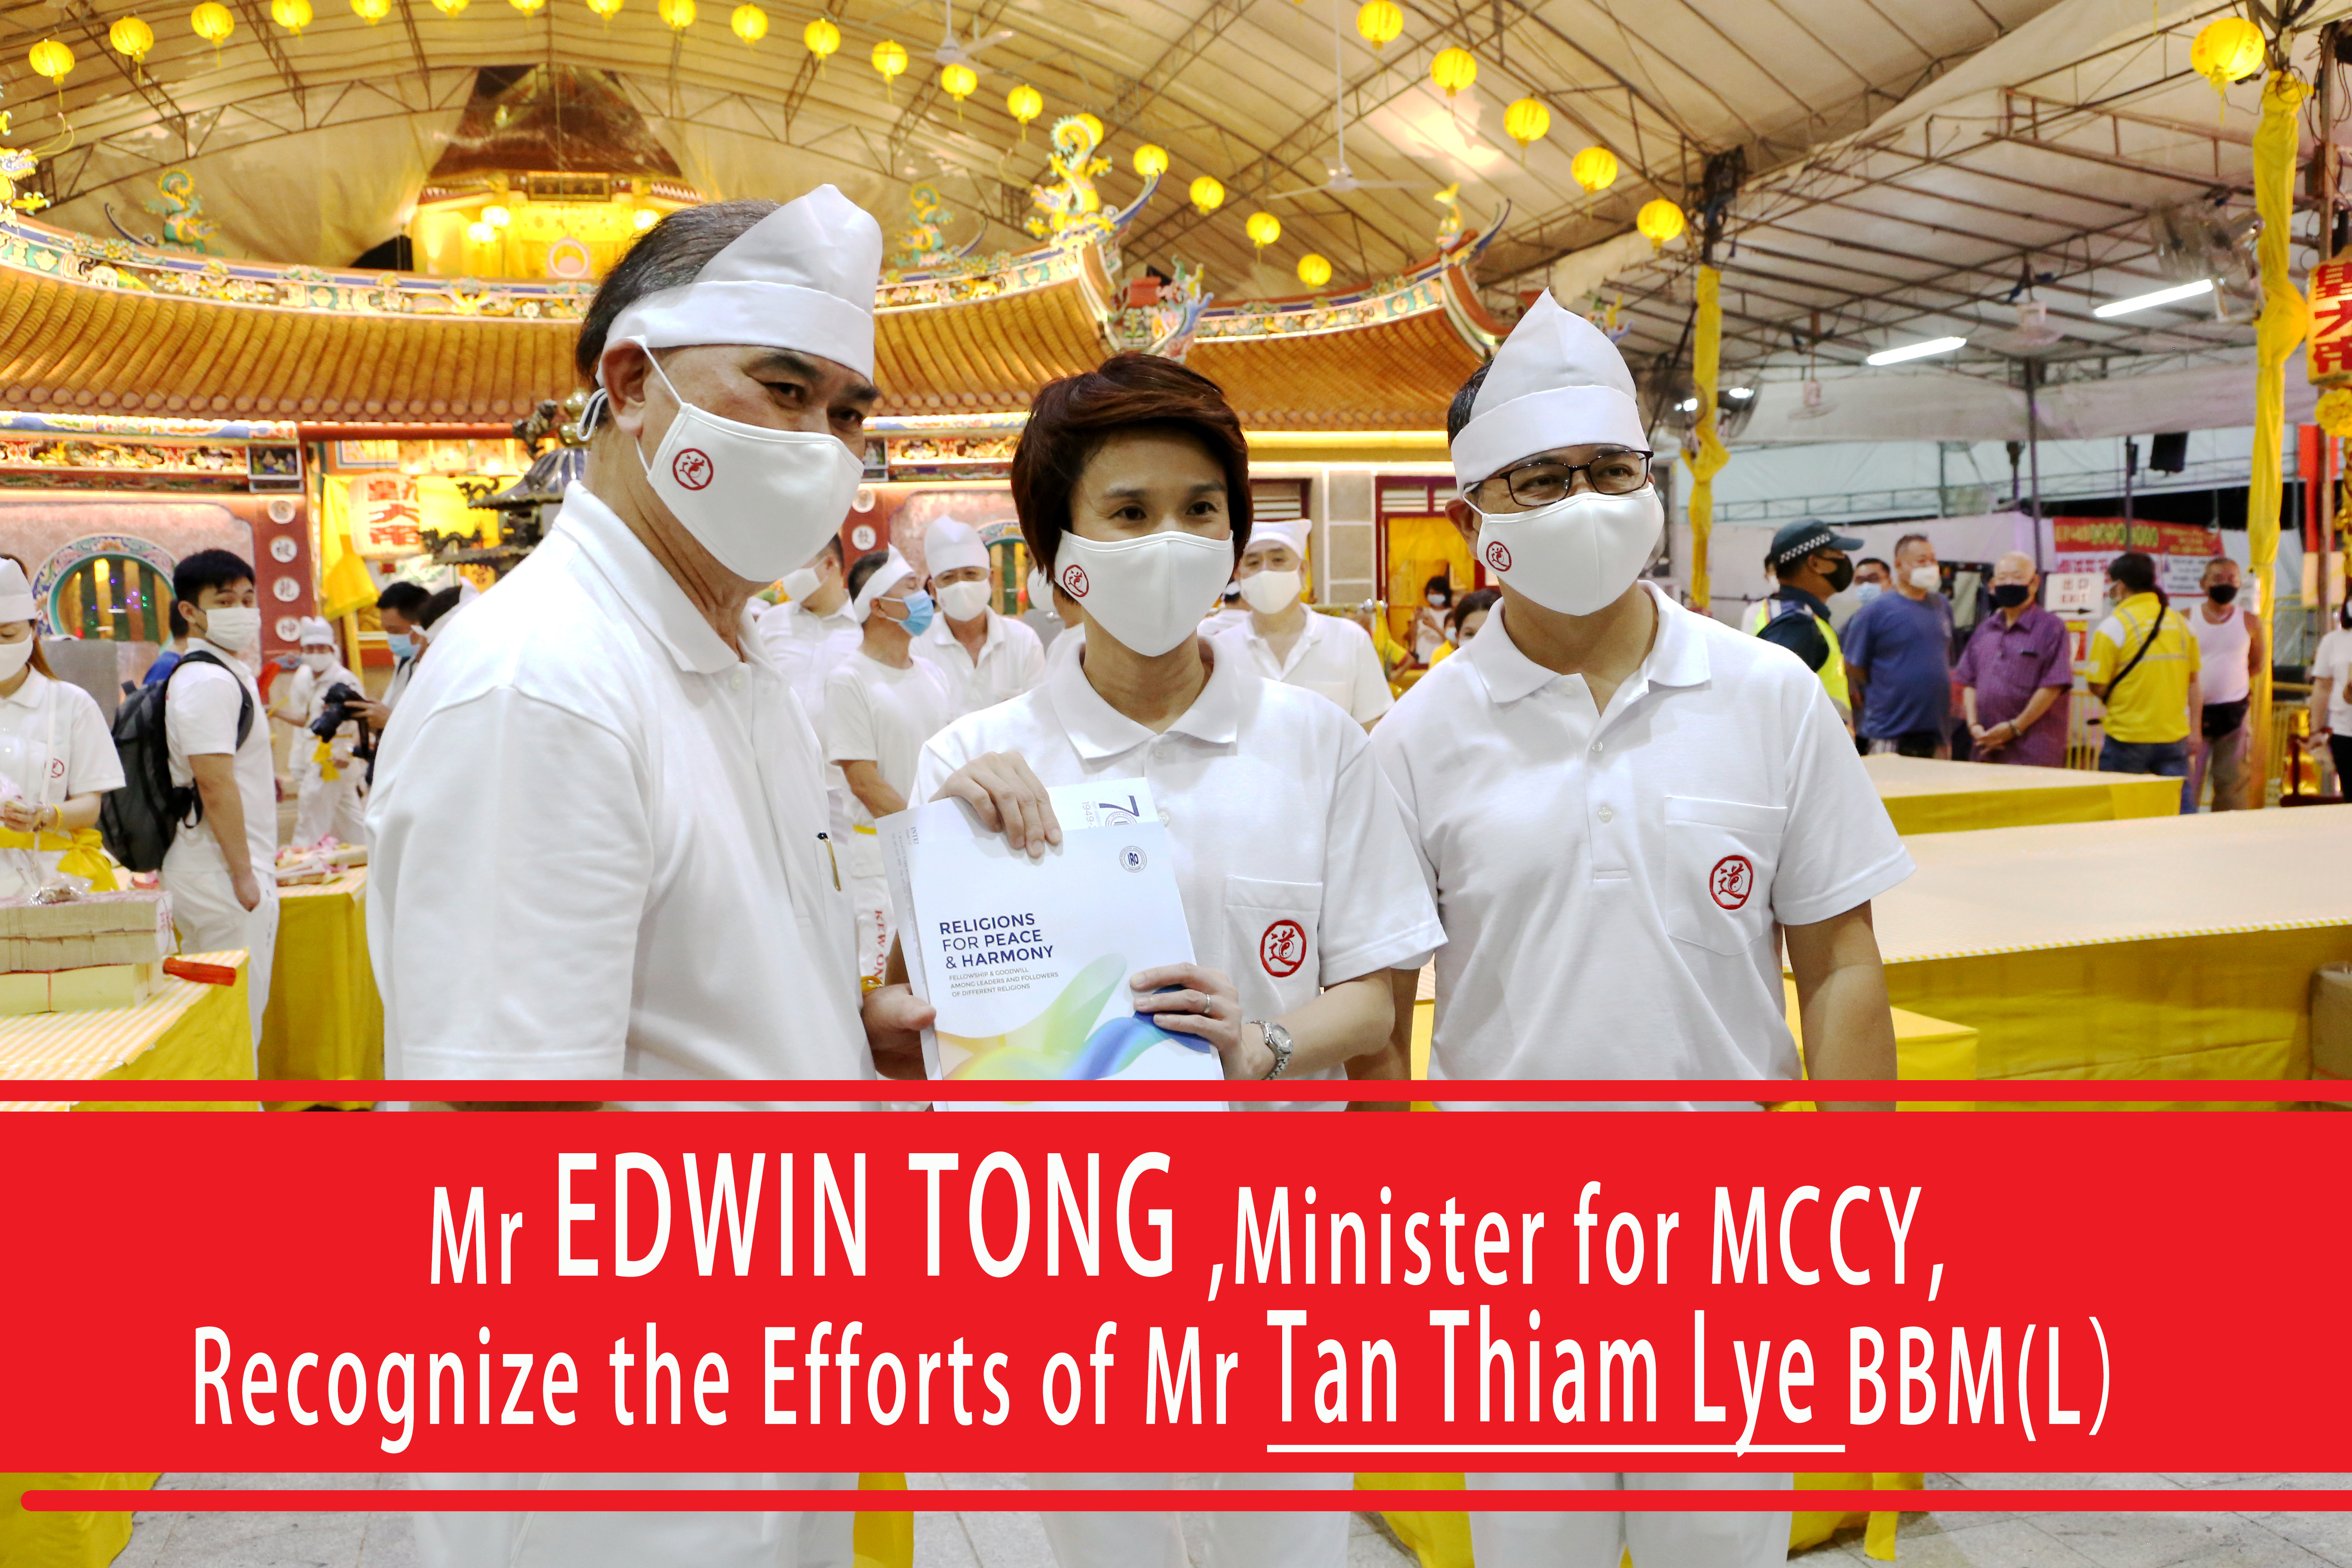 Mr EDWIN TONG ,Minister for MCCY, Recognize the Efforts of Mr Tan Thiam Lye BBM(L）